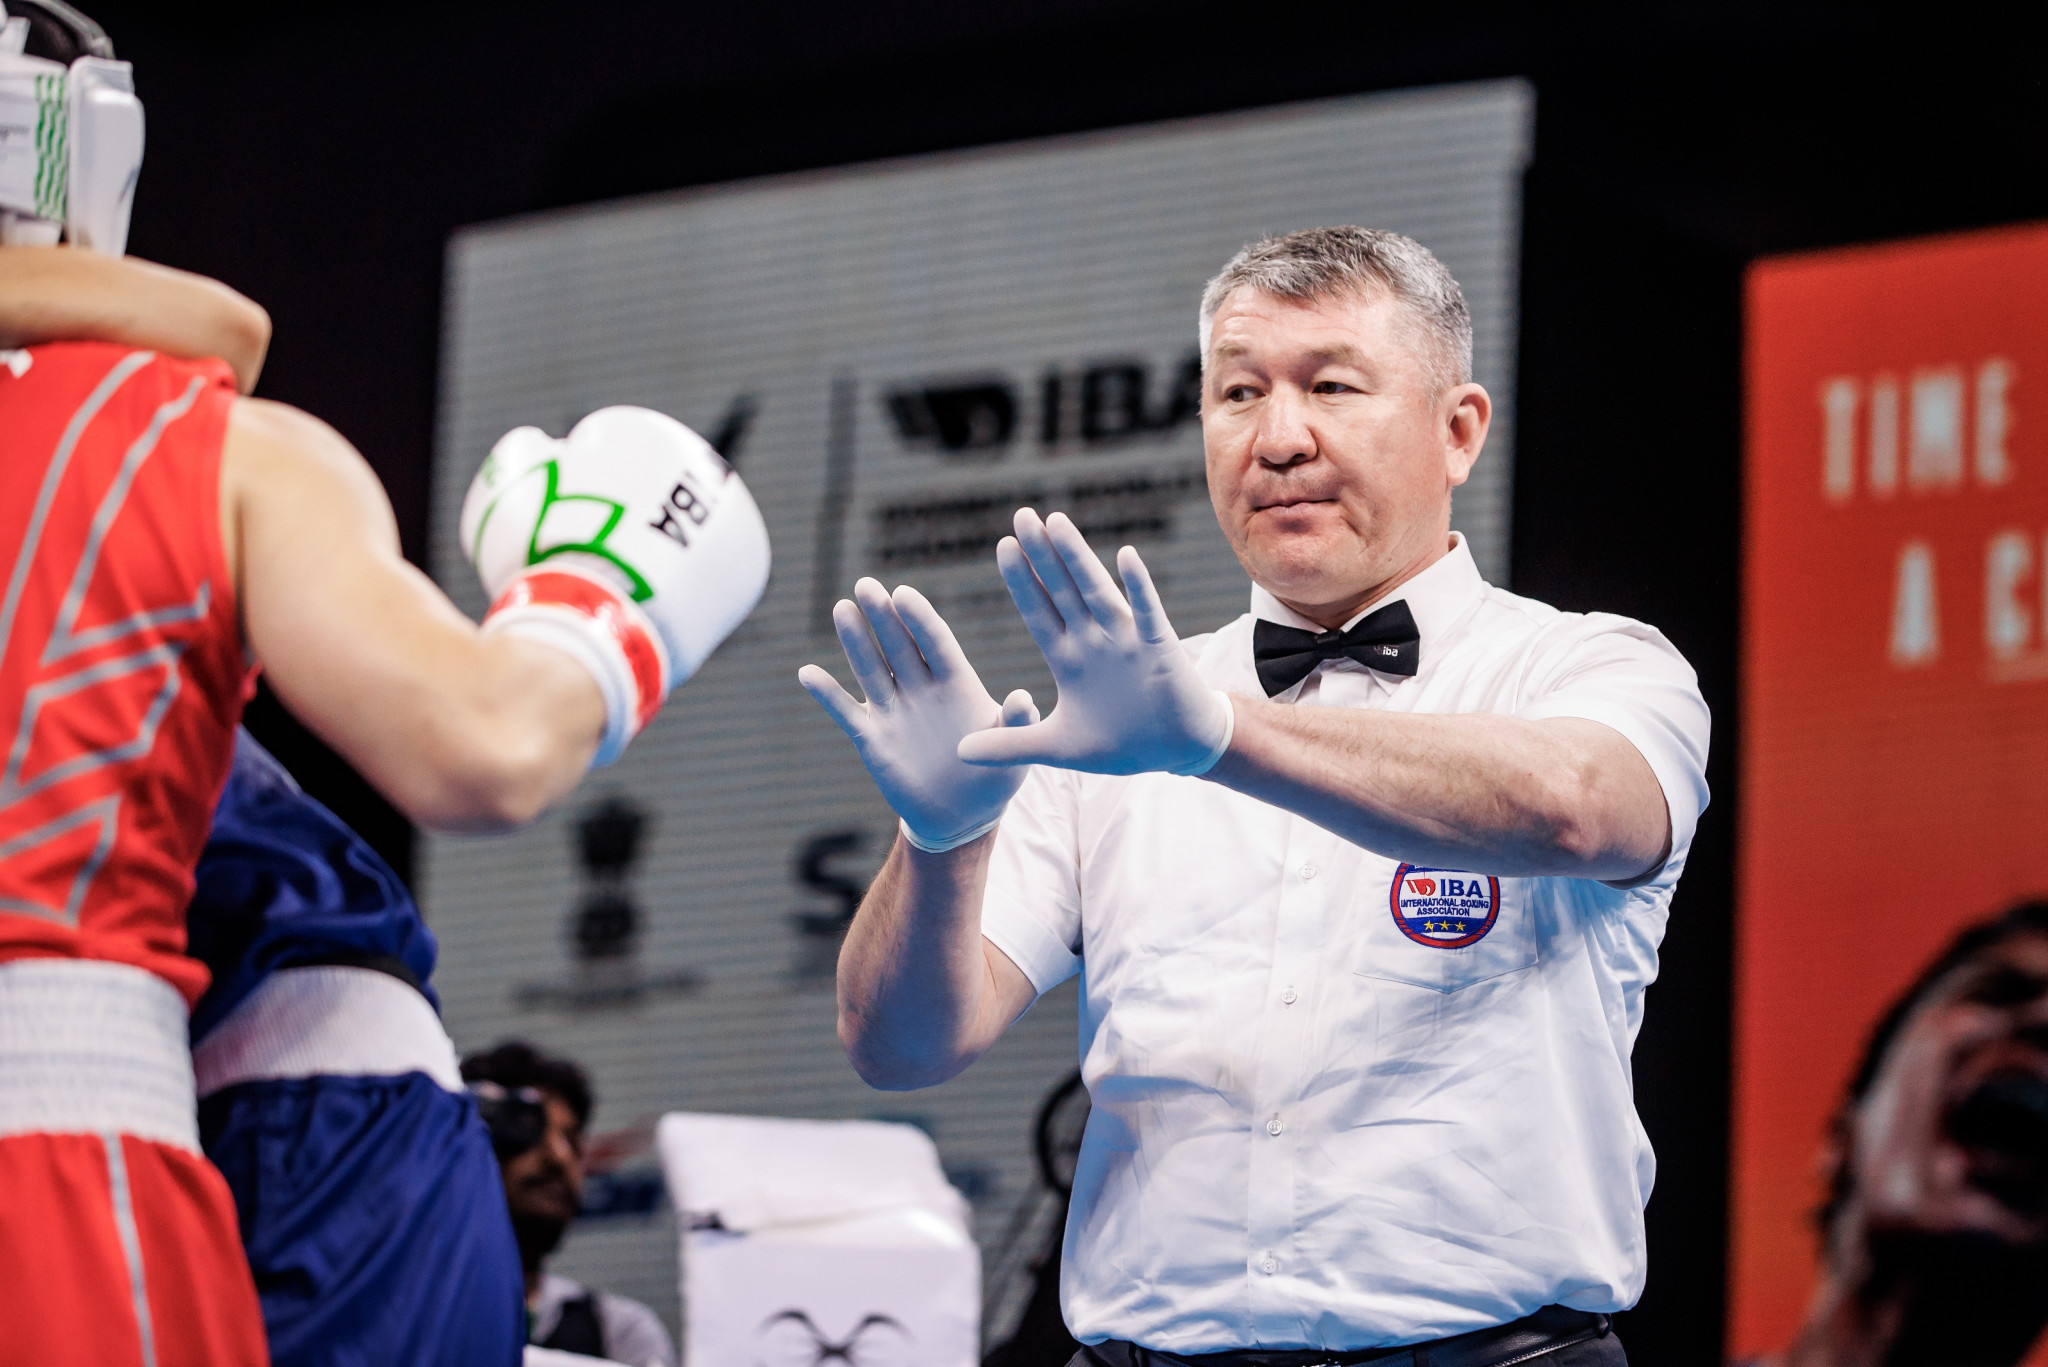 IBA threatens legal action against IOC for inviting its officials to Paris 2024 boxing events